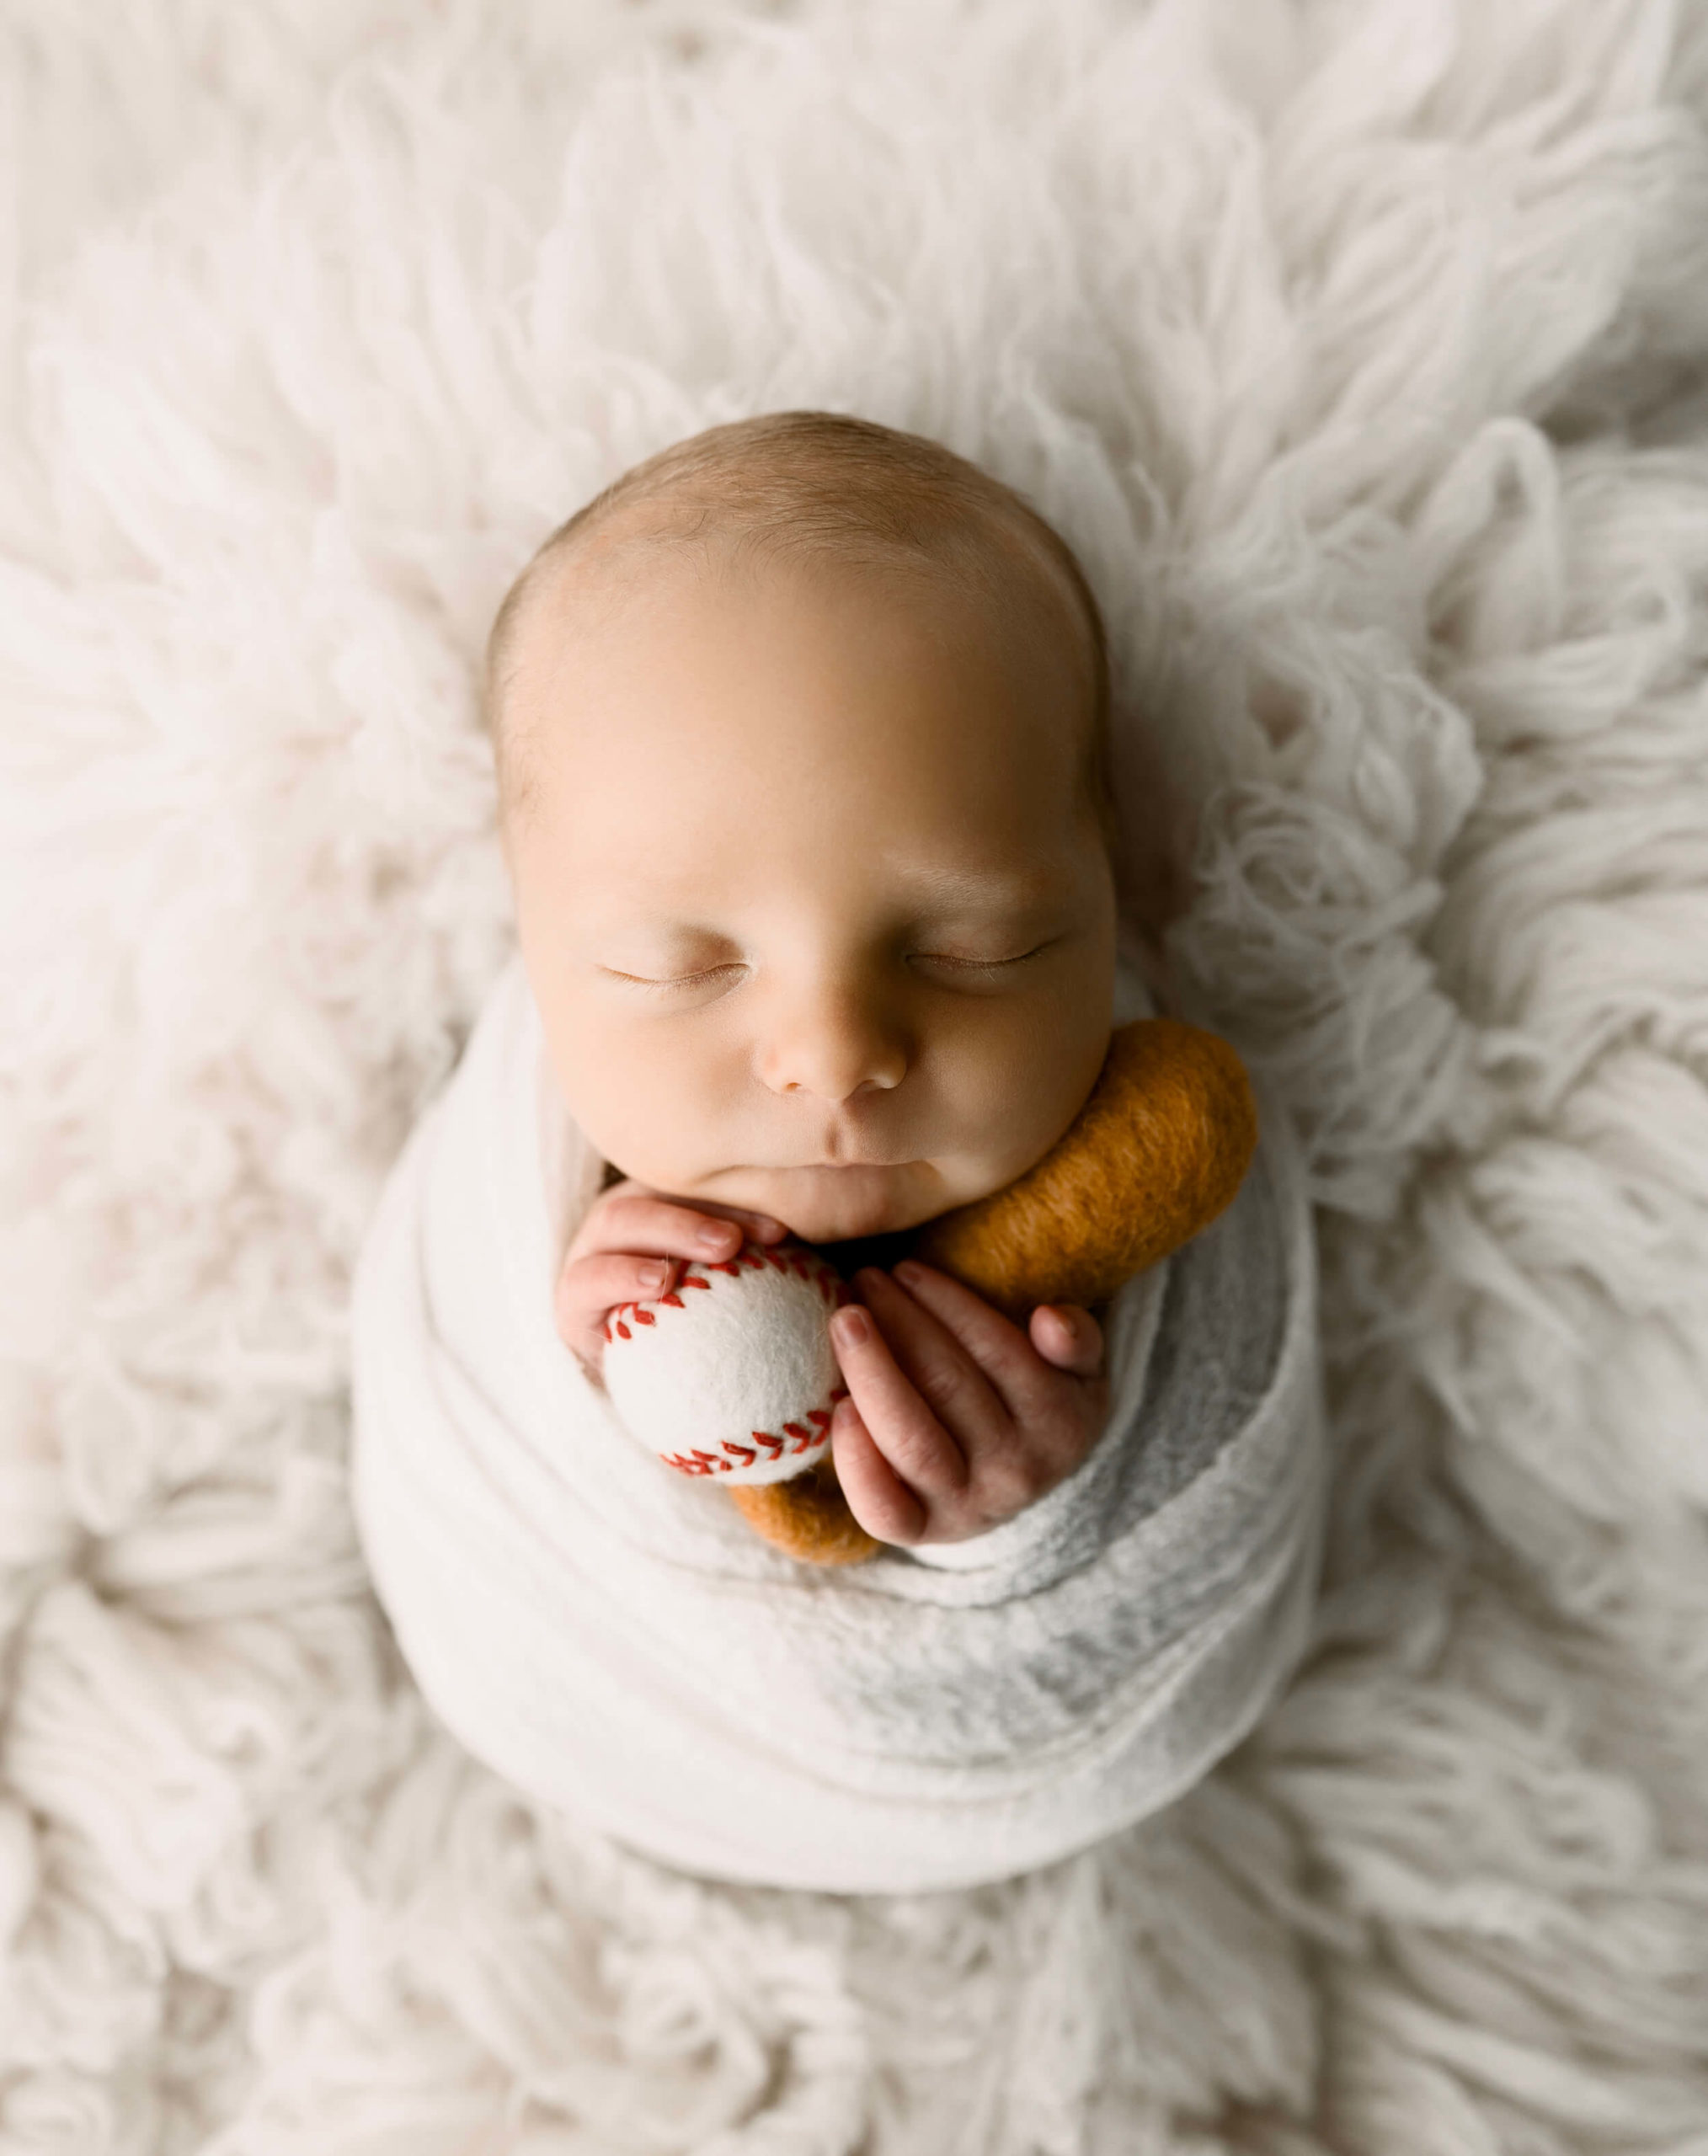 Newborn photo of a baby boy wrapped holding a bat and ball